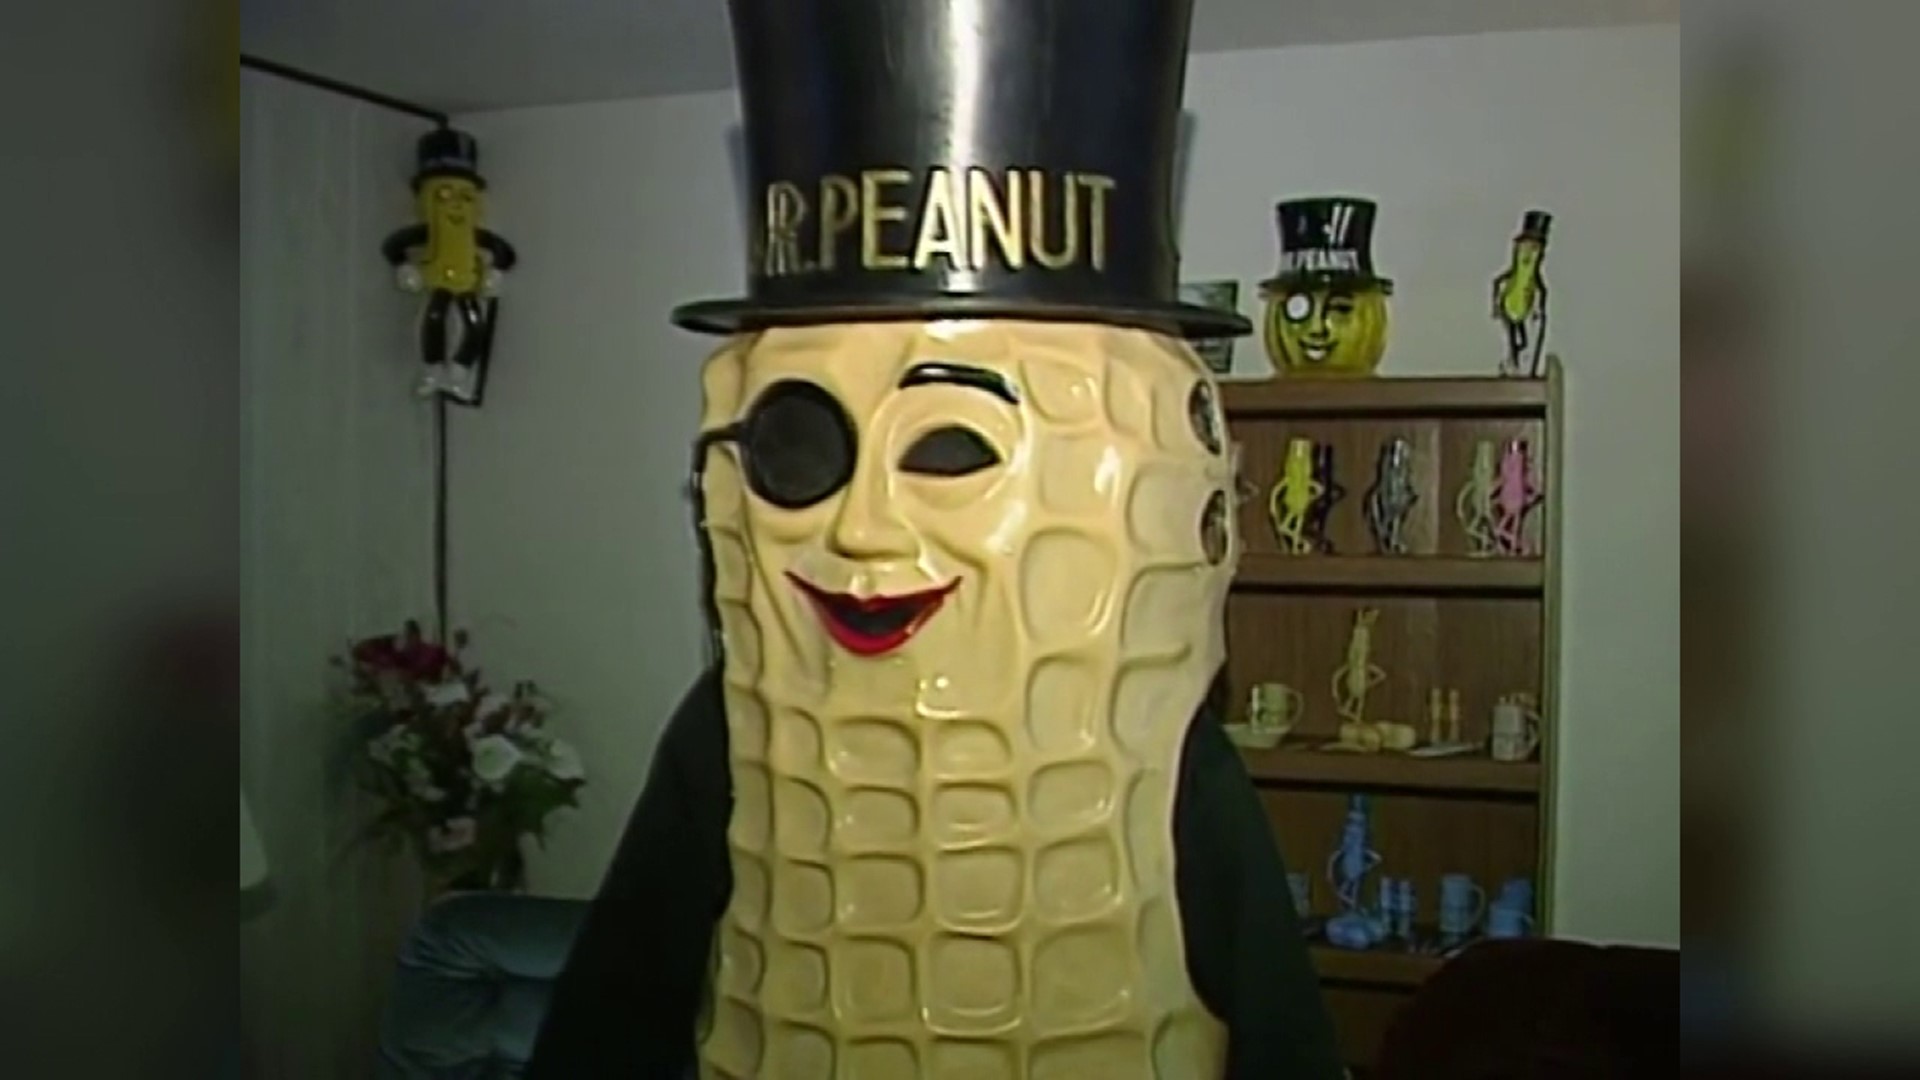 Join Mike Stevens on this trip to Union County, where the legacy of Mr. Peanut is alive and well.